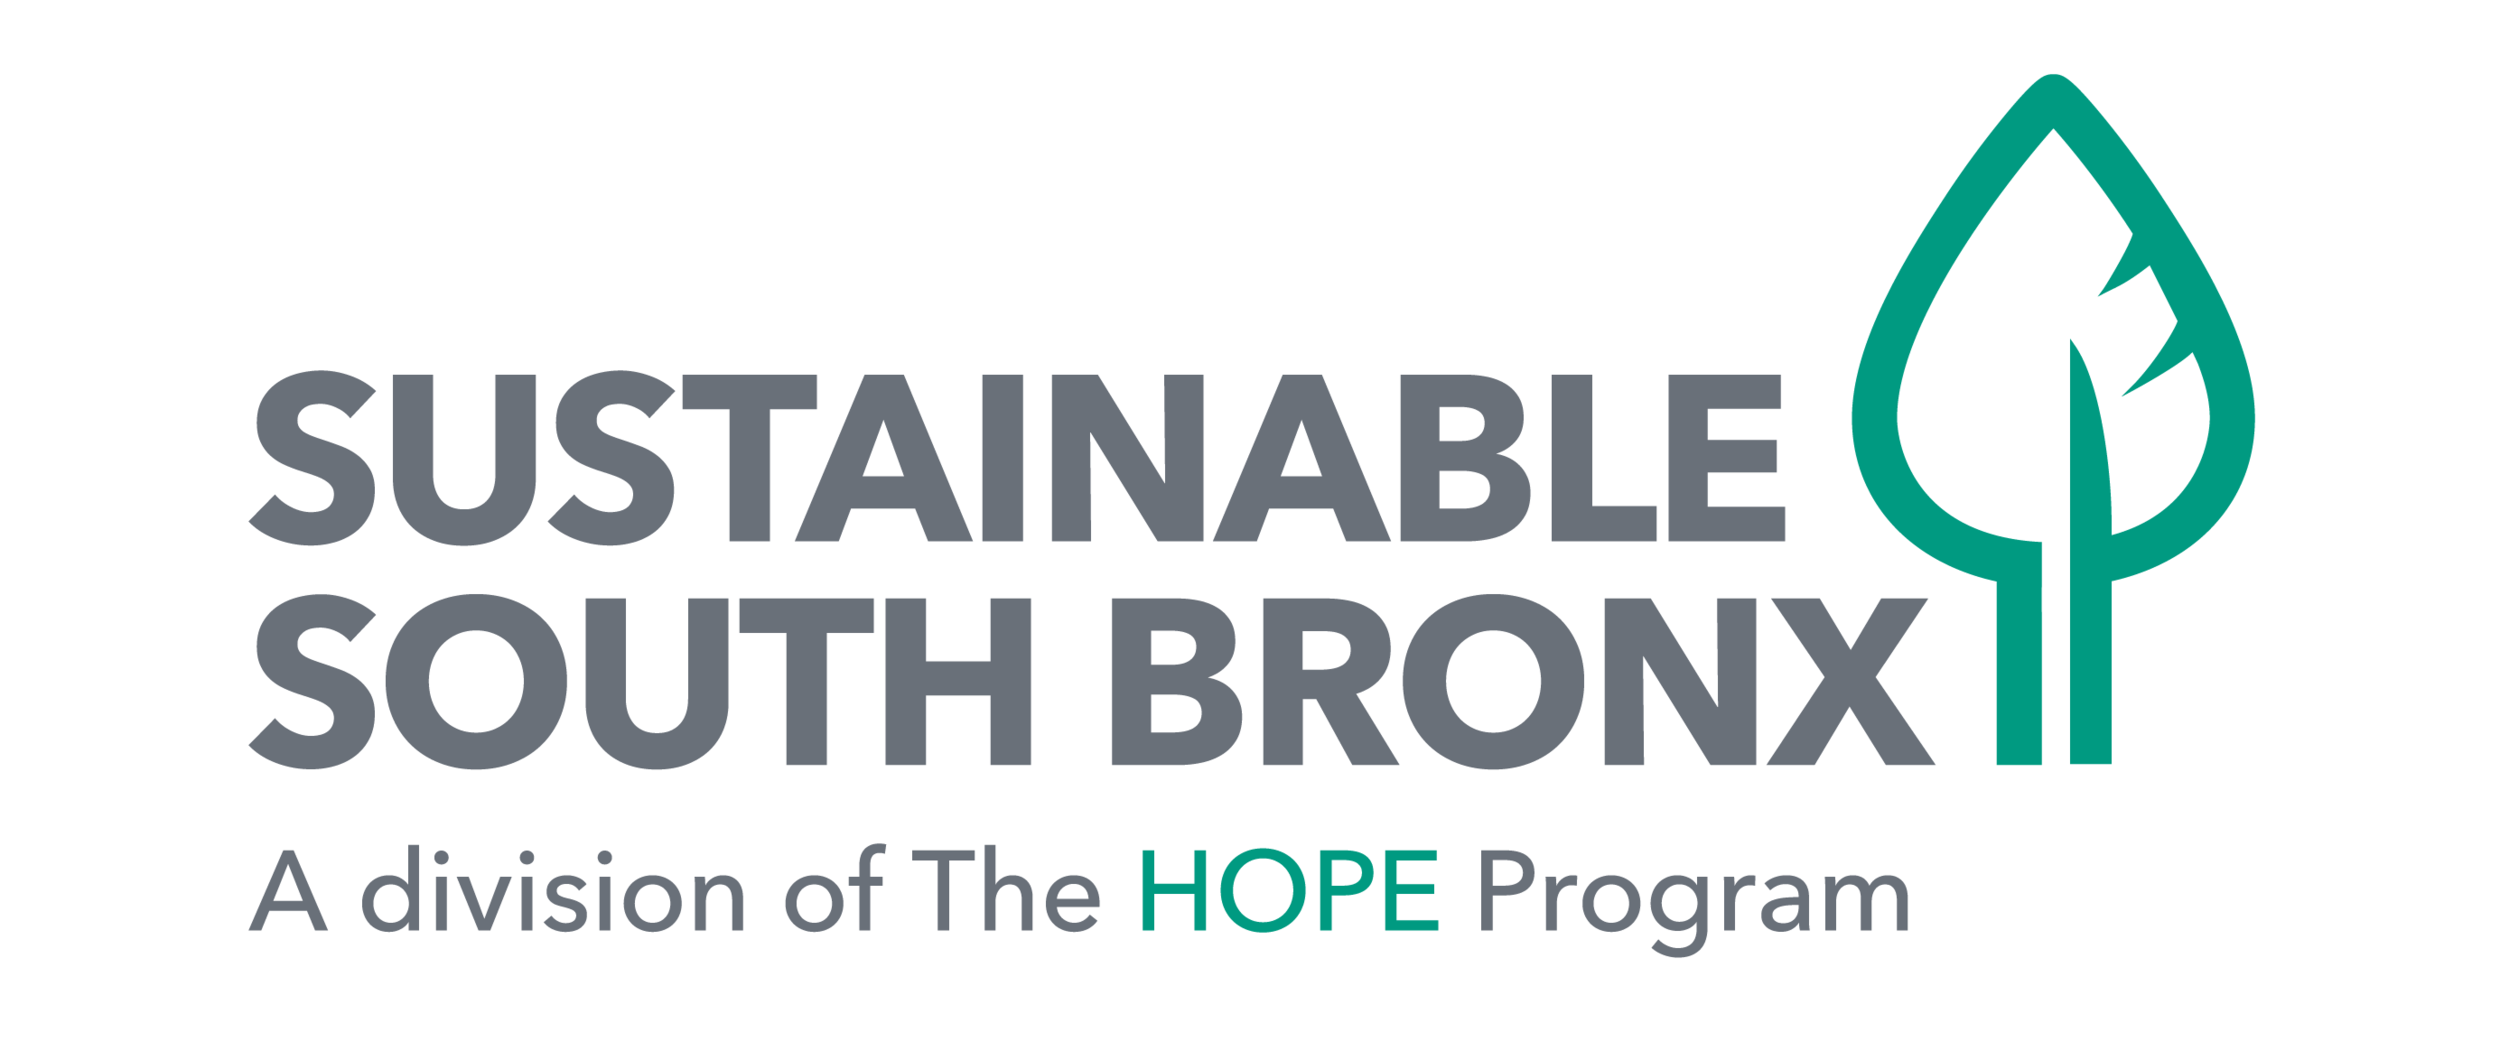 Sustainable South Bronx